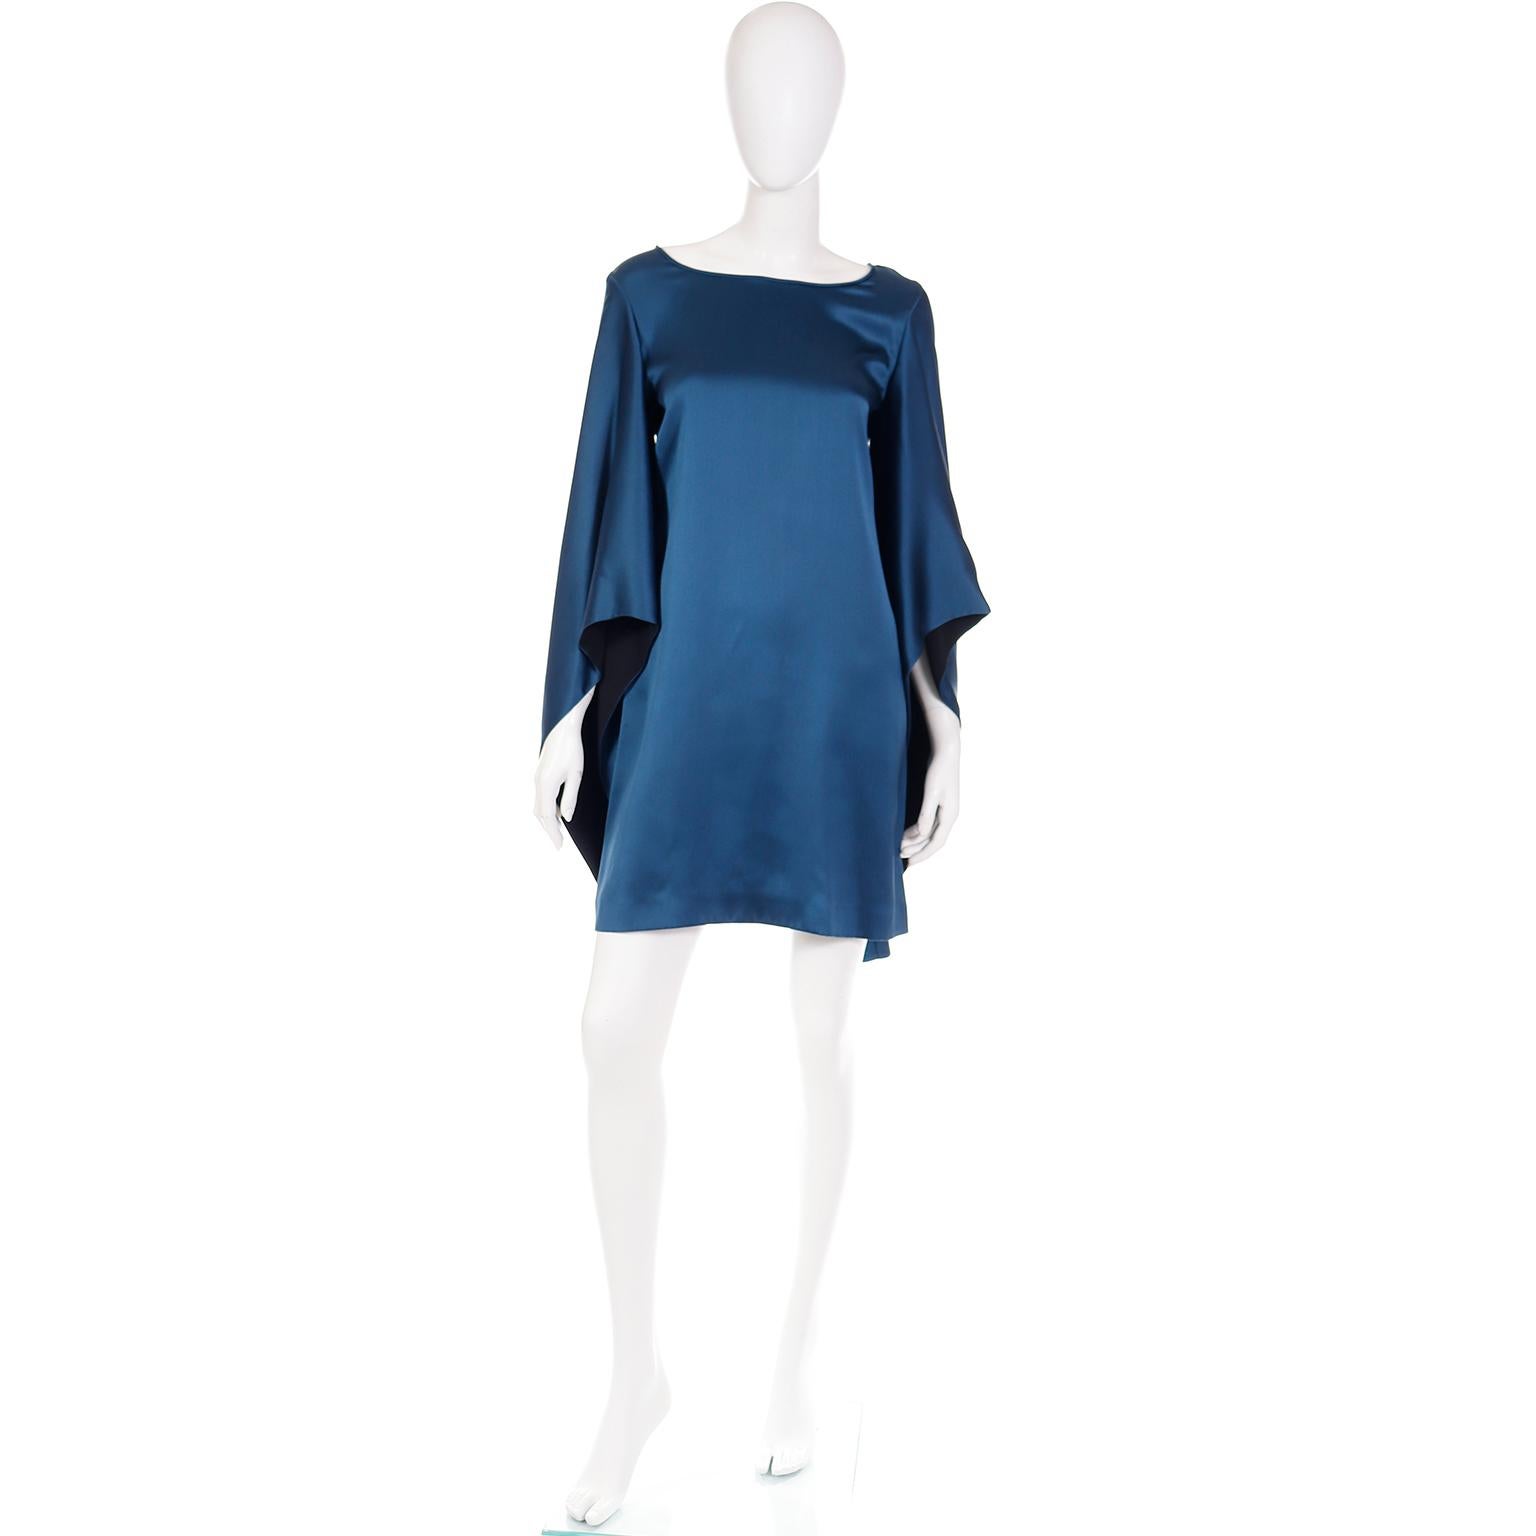 This is a really pretty vintage Yves Saint Laurent Stefano Pilati 2000's dark lapis blue shift dress with long exaggerated pagoda style sleeves. The sleeves have a black lining that shows just enough for a great contrast. The dress has a wide scoop